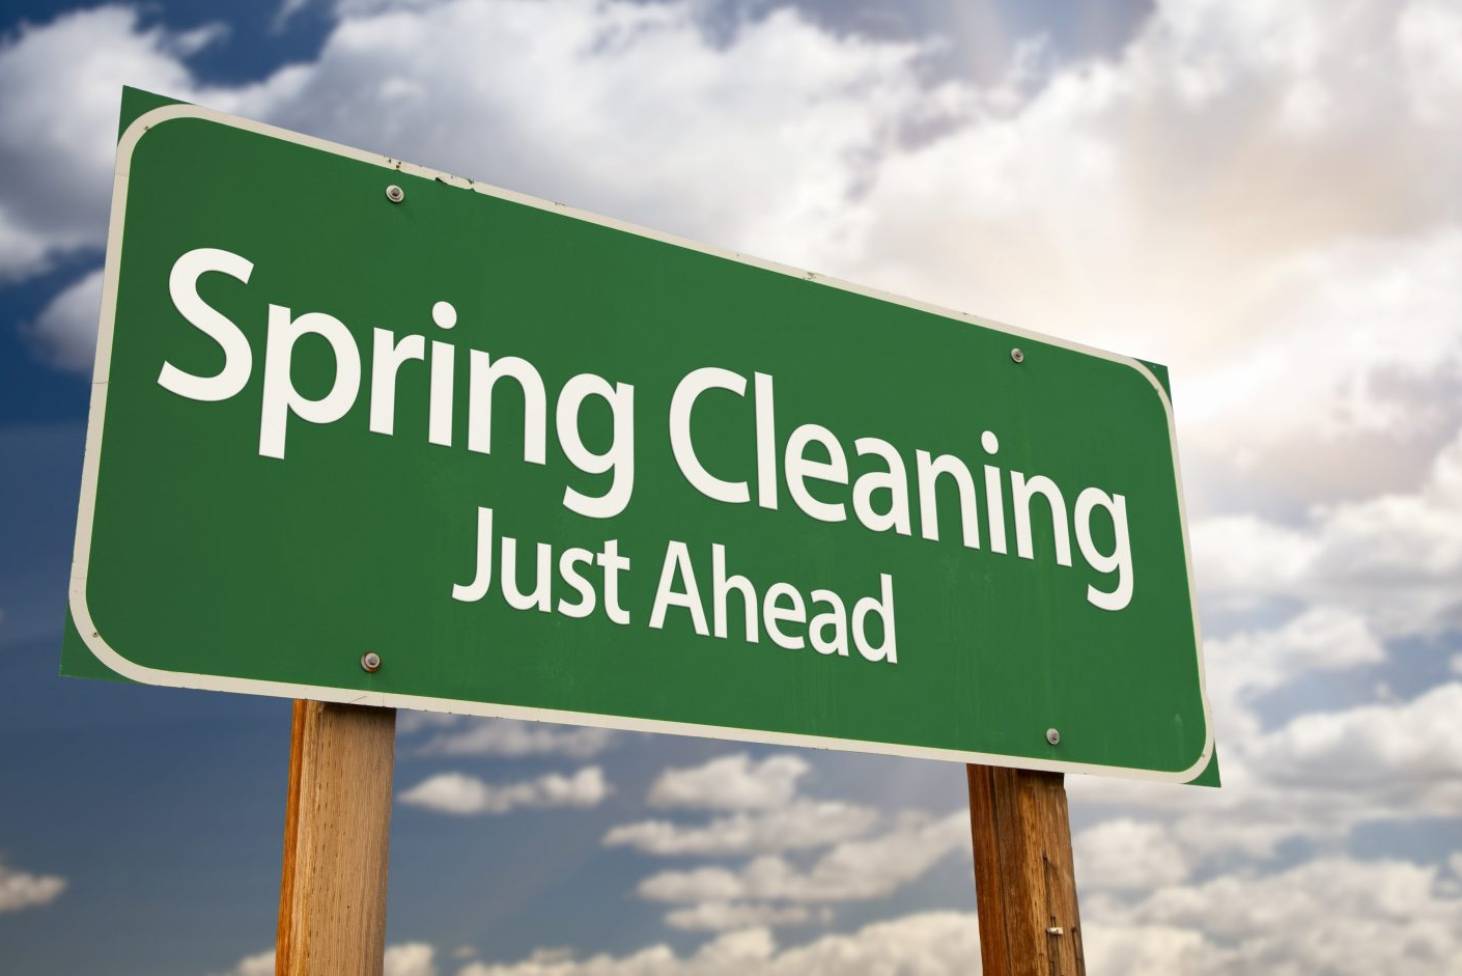 Spring-cleaning-ahead